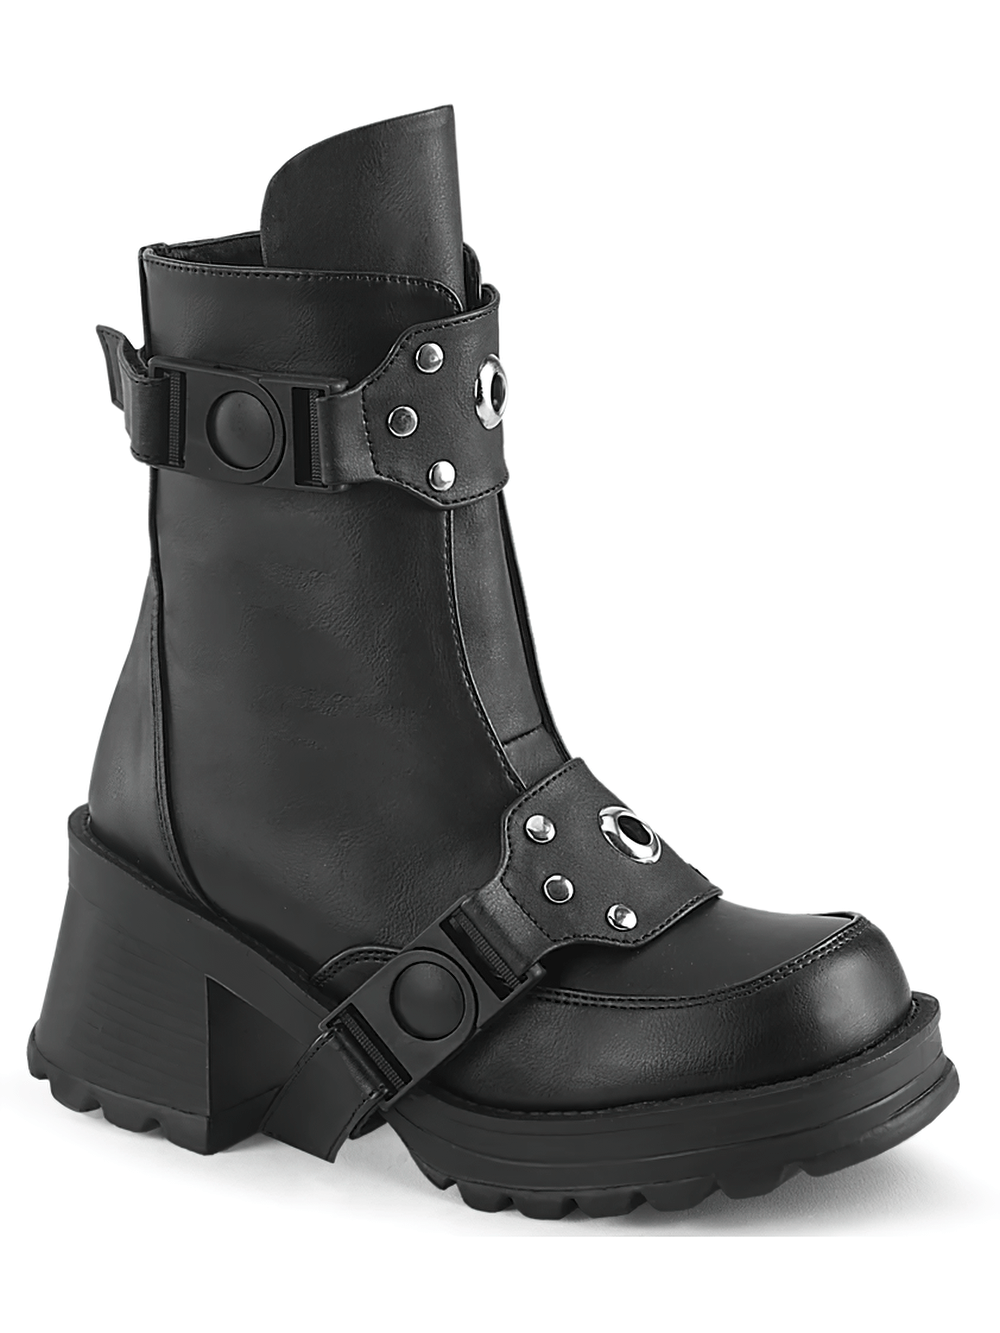 DEMONIA Chunky Heels Black Ankle Boots with Buckles